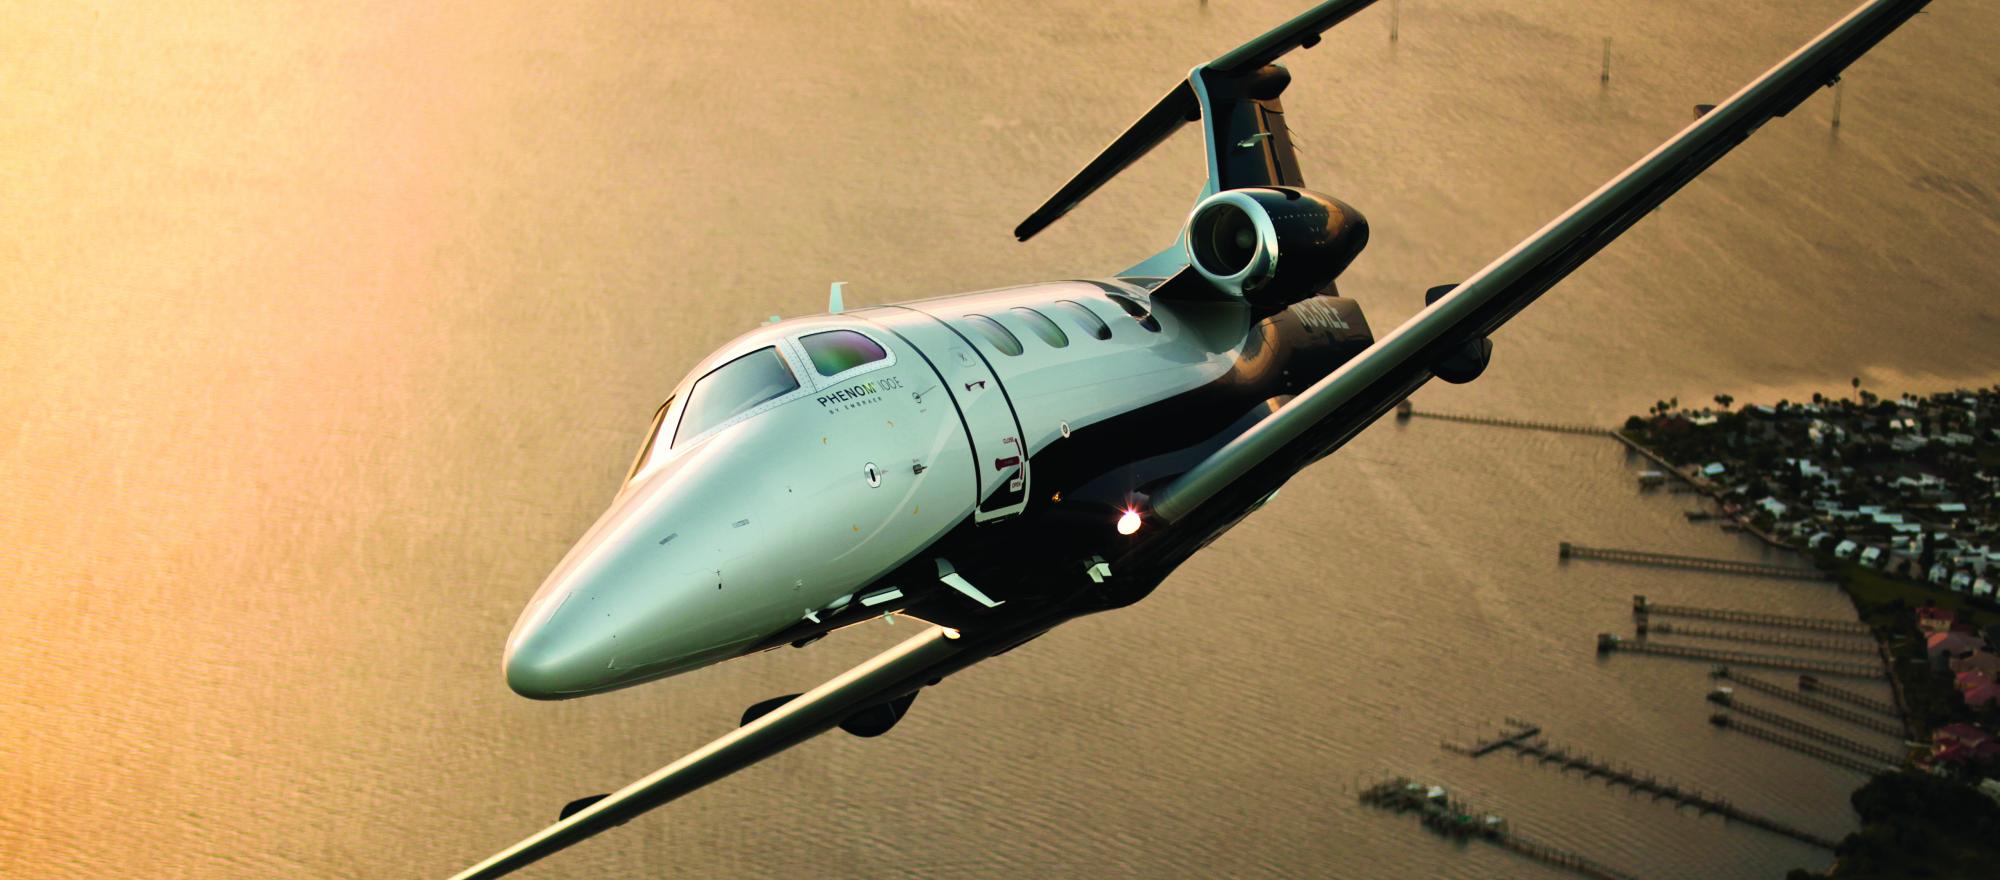 Compared with the Cessna Citation Mustang, the Phenom 100 cruises 50 knots faster and weighs 1,000 pounds more (at maximum takeoff weight)